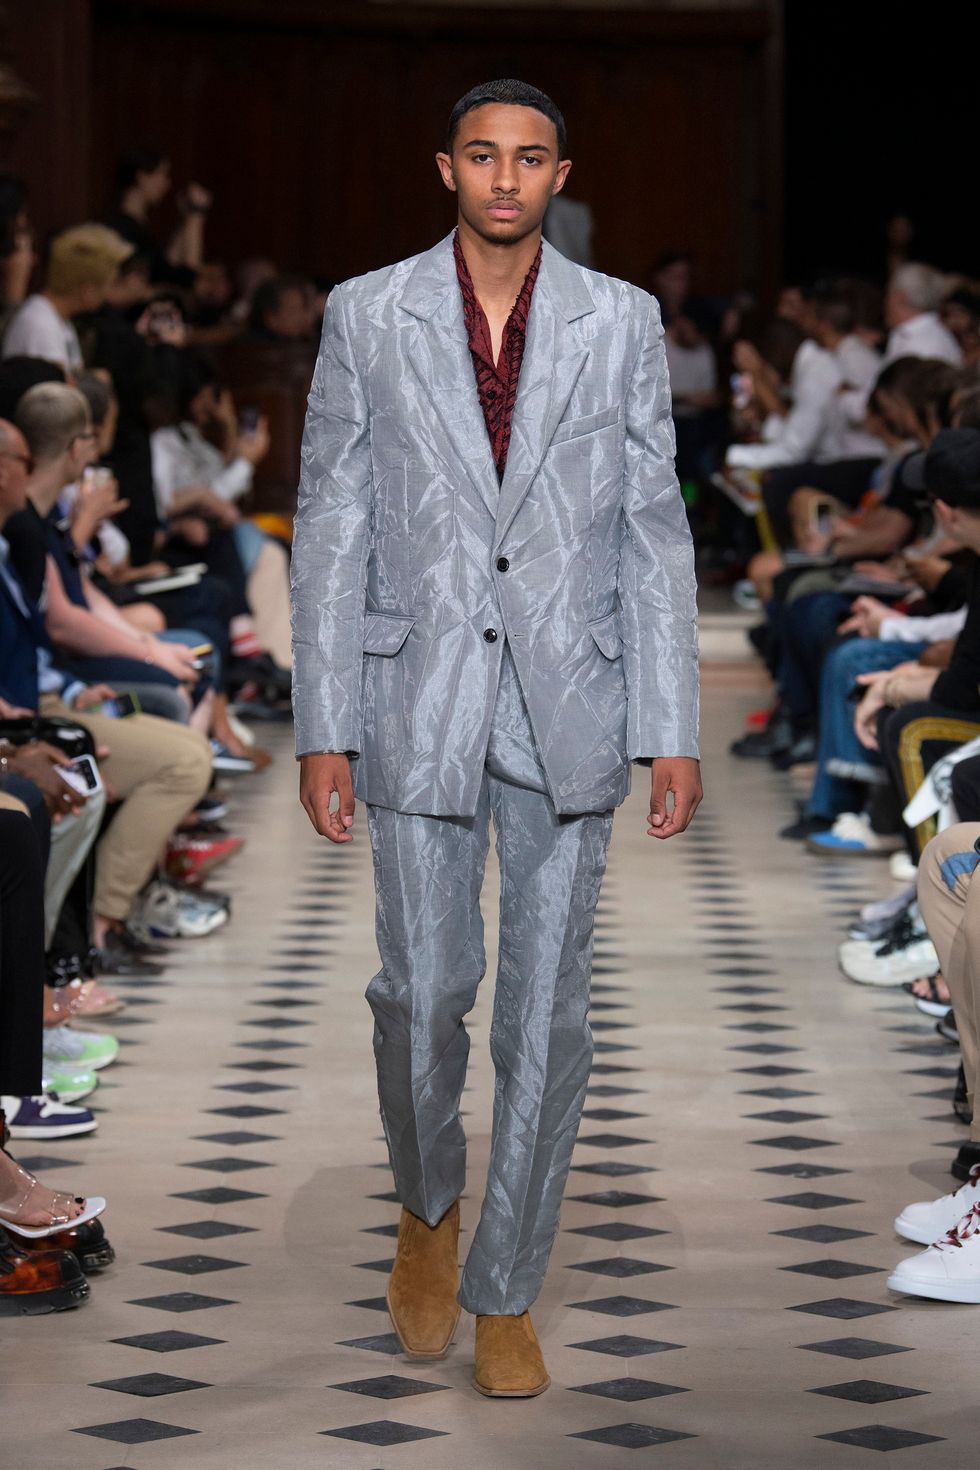 Louis Vuitton, Y/Project and Menswear Trends From Spring 2020 - PAPER ...